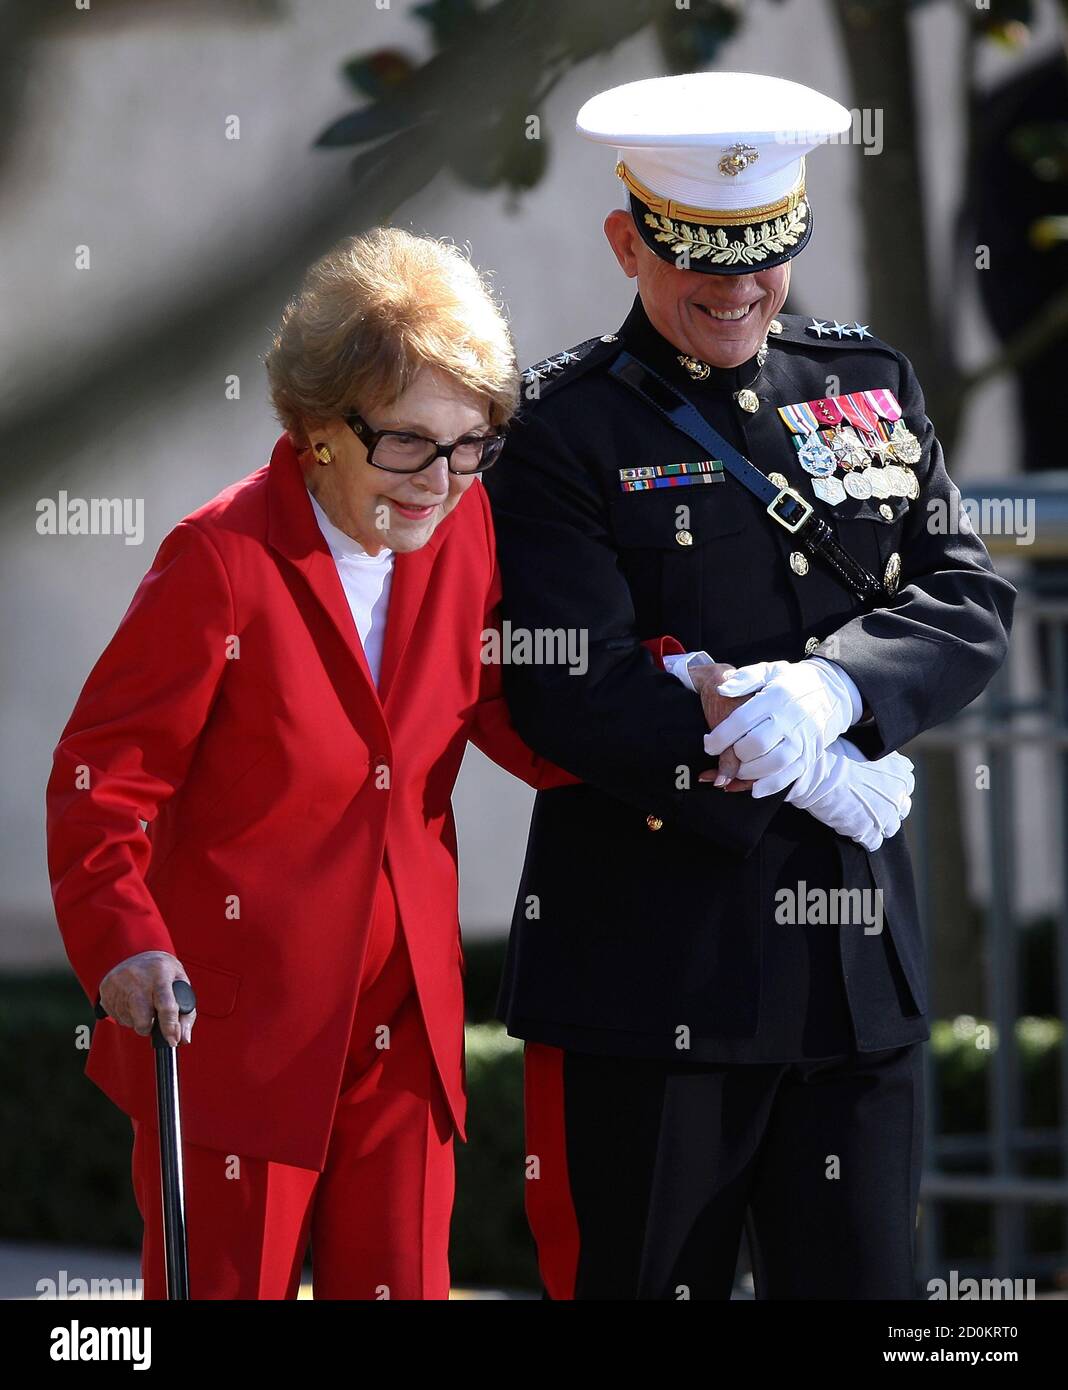 U.S. Marine Corps Lieutenant General George Flynn (R) escorts former U.S First Lady Nancy Reagan to the laying of the wreath ceremony at the resting place of her husband former U.S. President Ronald Reagan, during his posthumous 100th birthday celebration at the President Reagan Memorial Site at Reagan Library in Simi Valley February 6, 2011. REUTERS/David McNew/Pool (UNITED STATES - Tags: POLITICS MILITARY ANNIVERSARY OBITUARY IMAGES OF THE DAY) Stock Photo